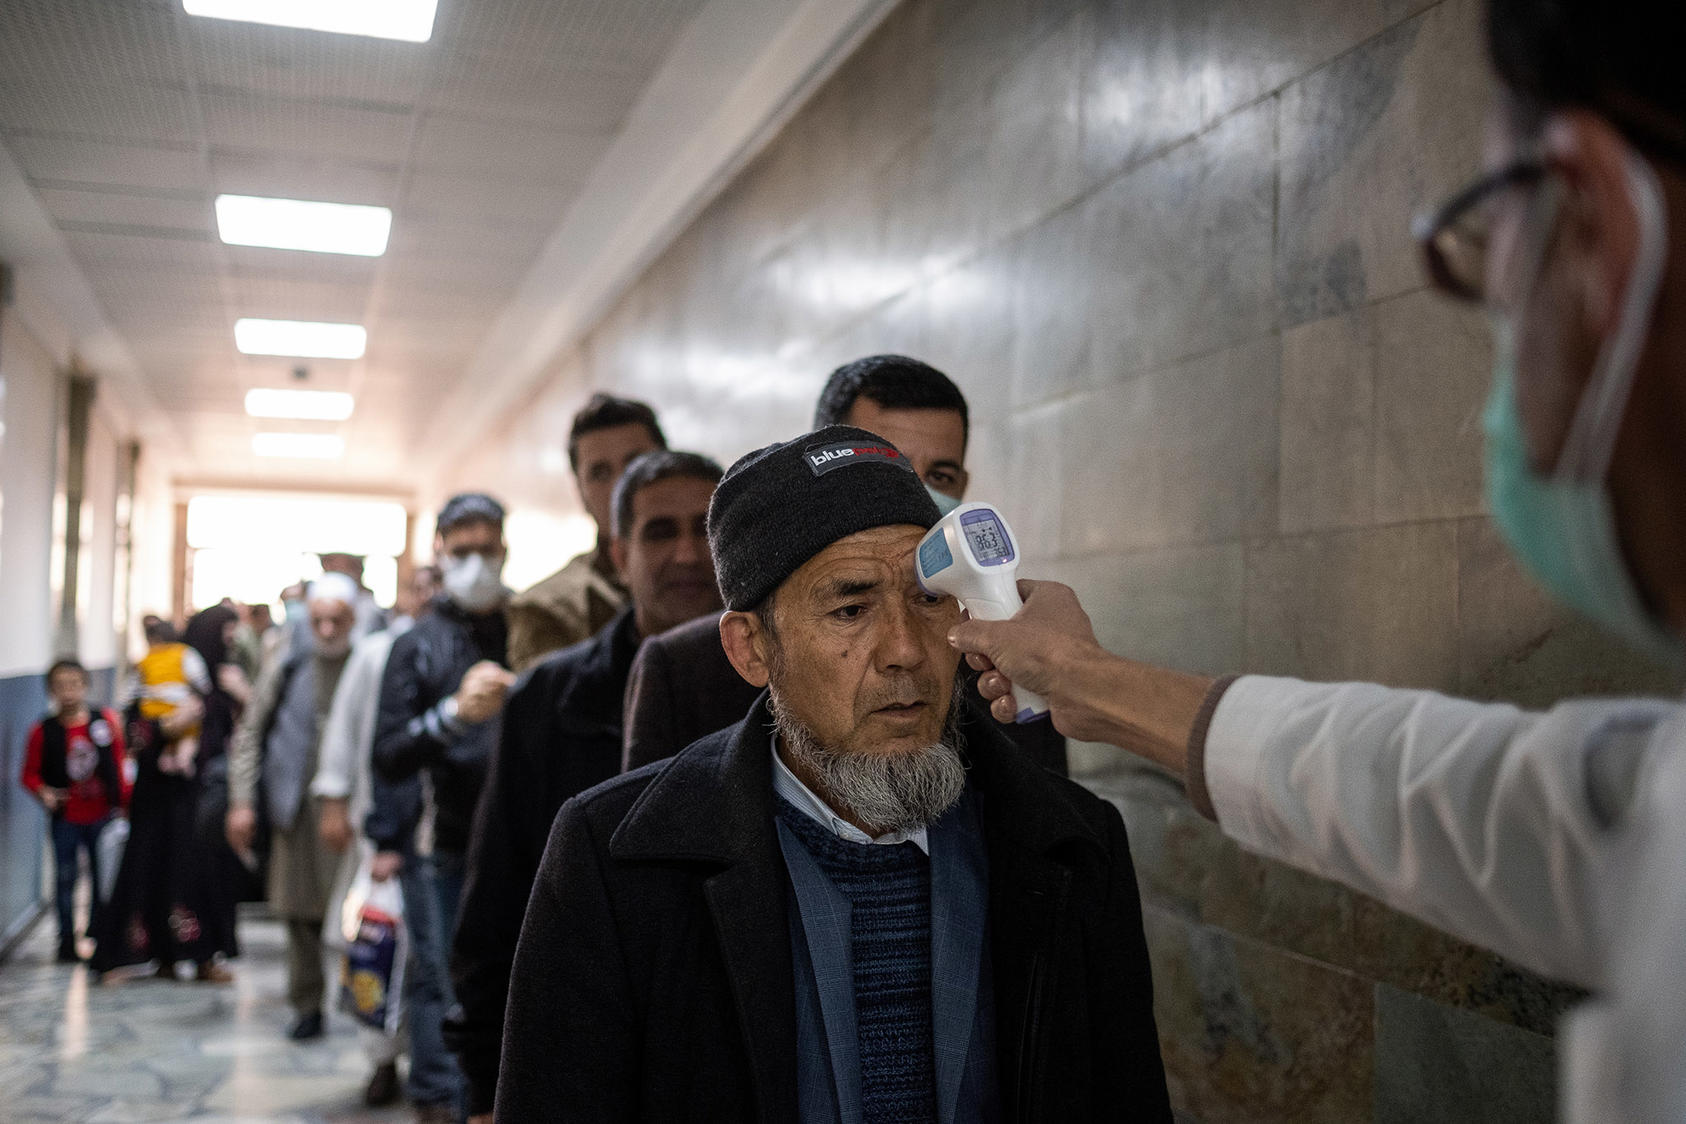 Travelers have their temperature checked before entering the airport in Kabul, Afghanistan, Monday, March 16, 2020. (Jim Huylebroek/The New York Times)